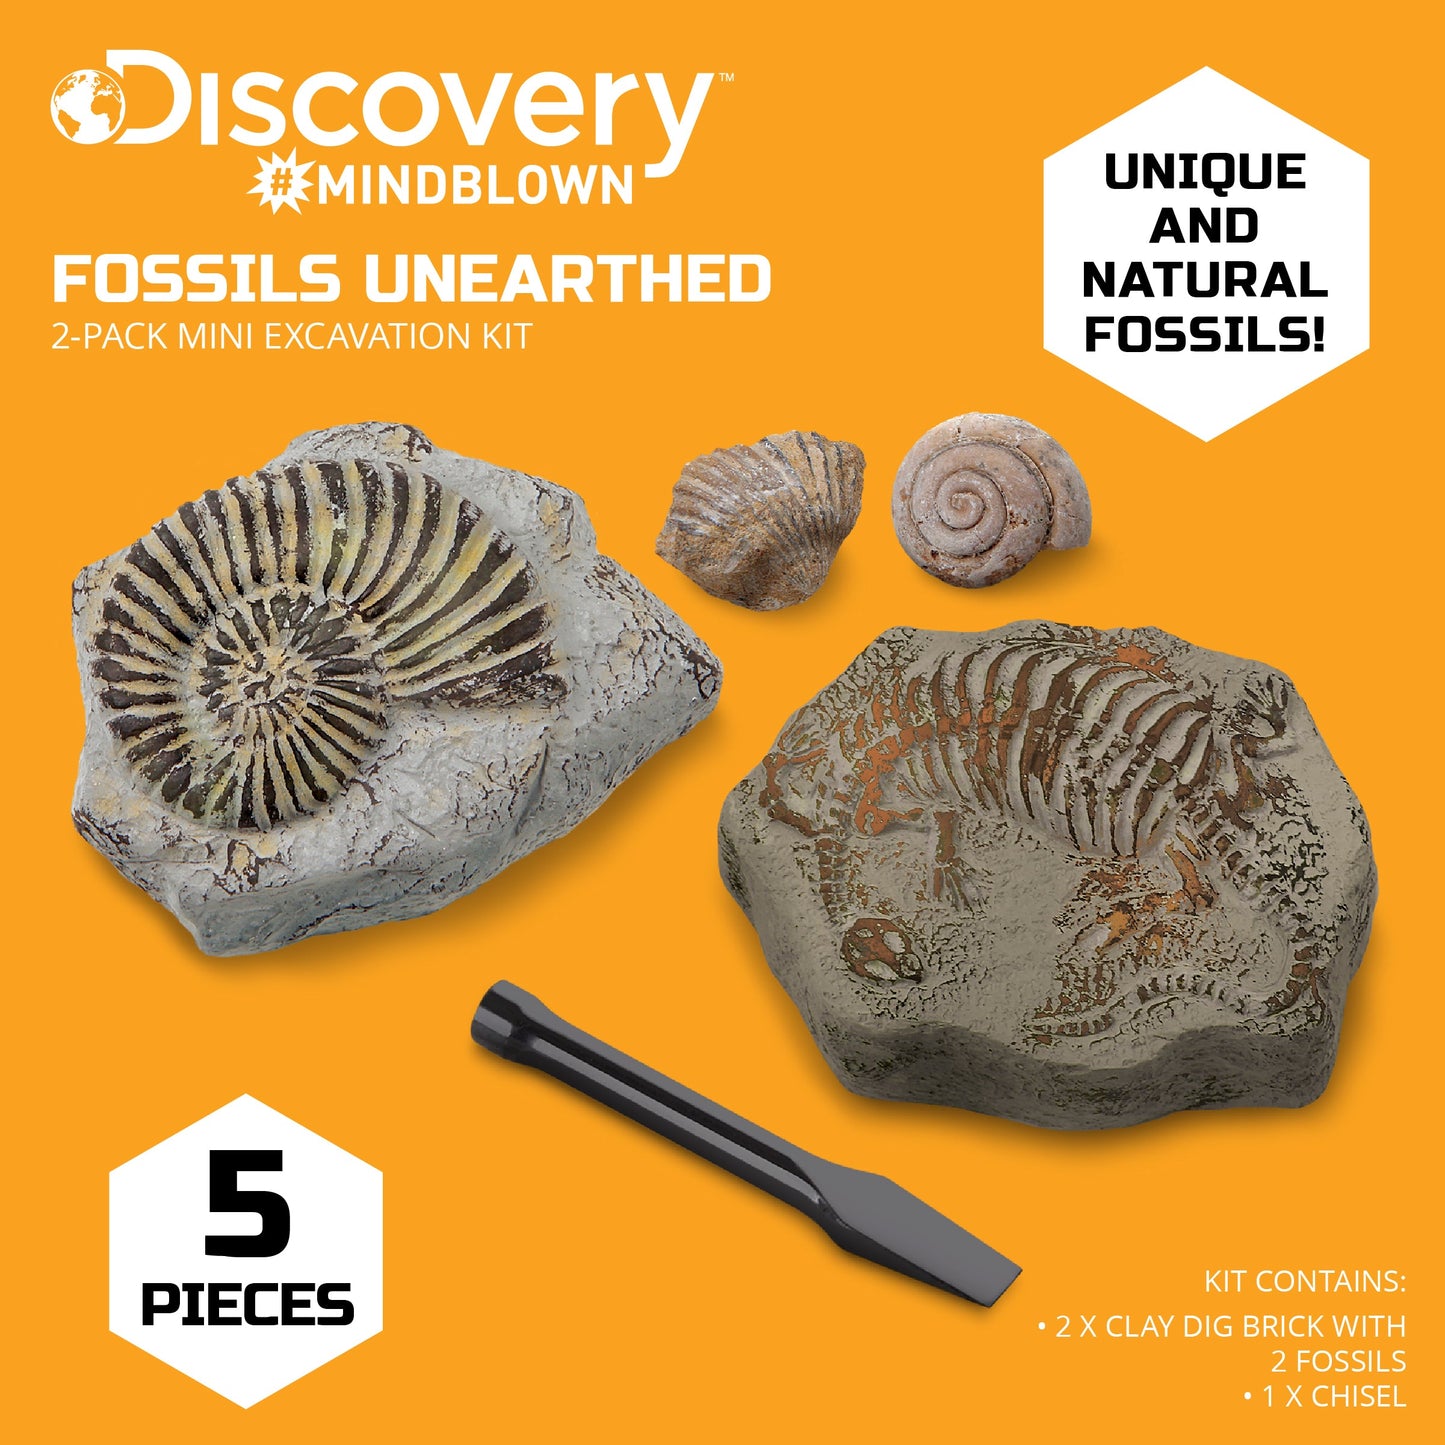 Discovery Mindblown Fossil Unearthed 2-Pack Mini Excavation Kit, with 5-pieces Unique And Natural Fossil